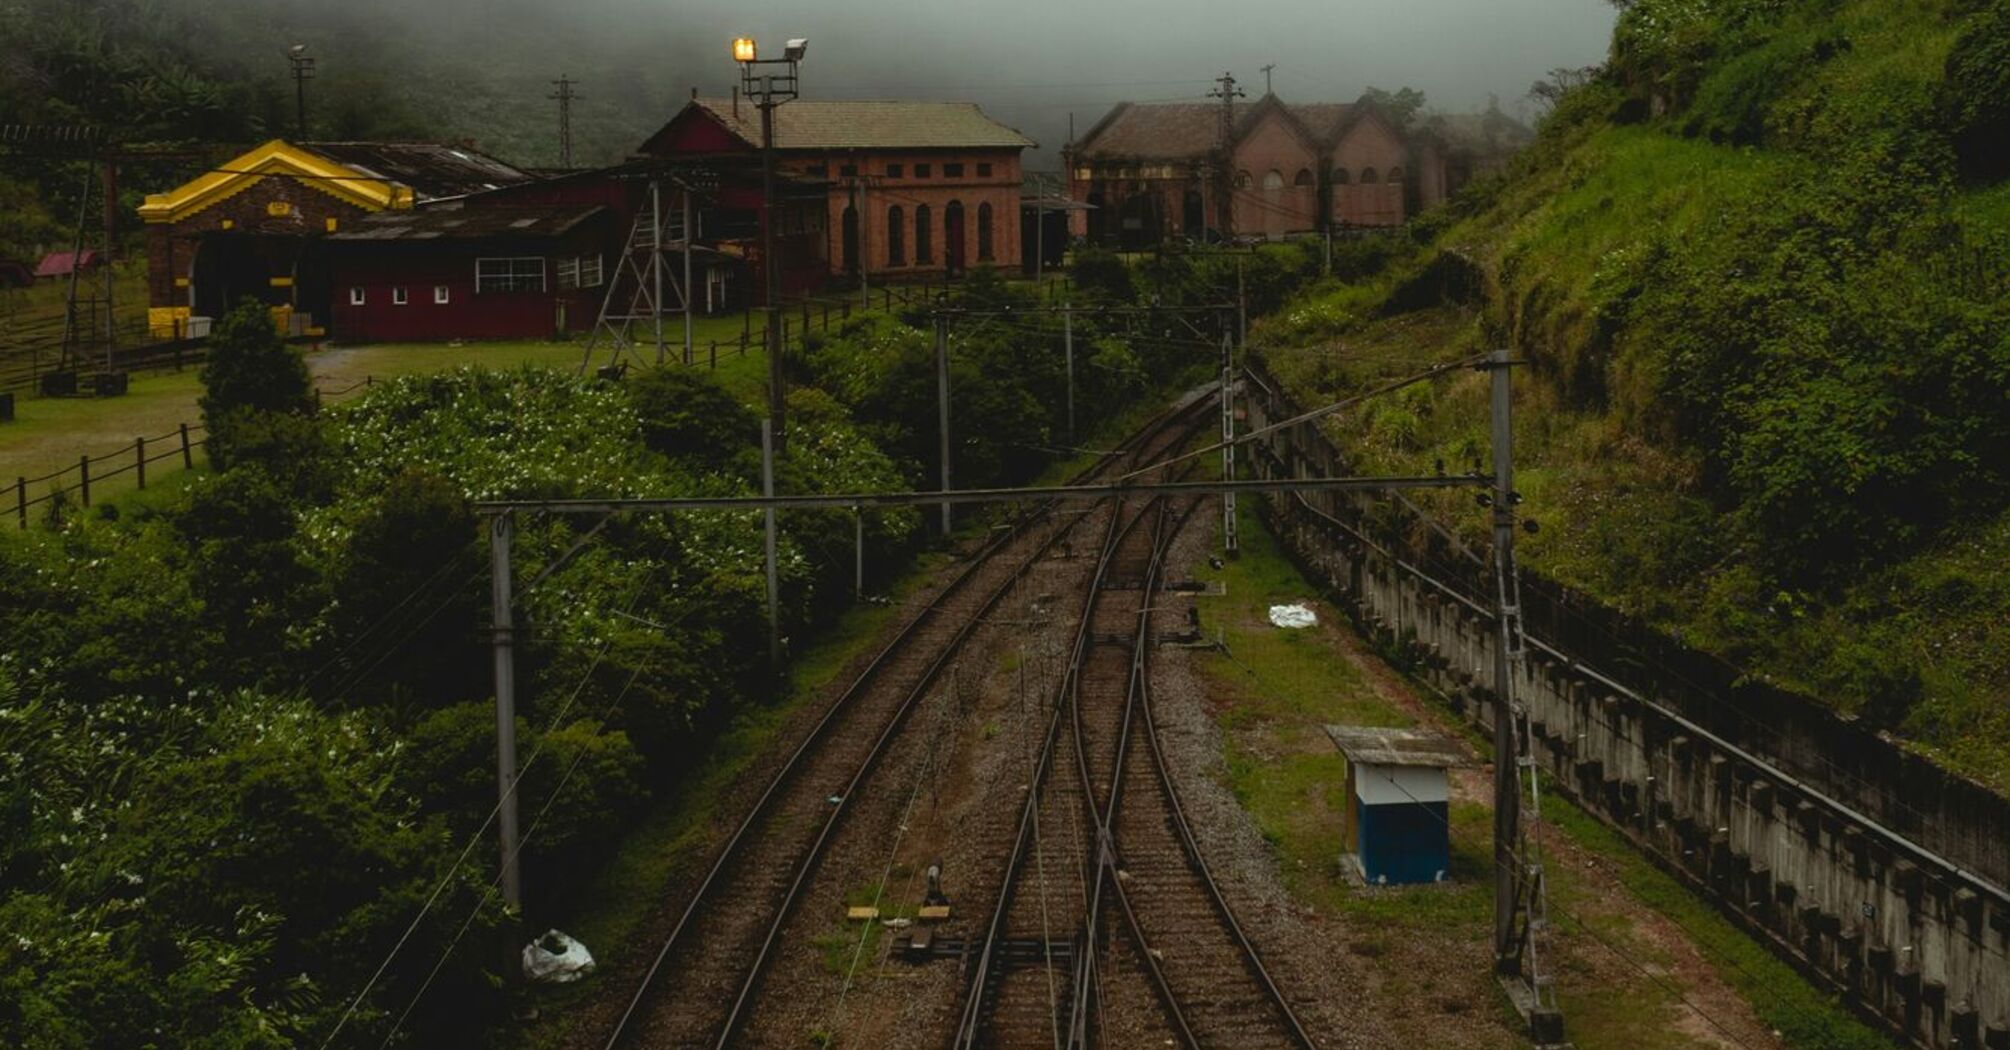 Foggy railway tracks surrounded by greenery and old buildings